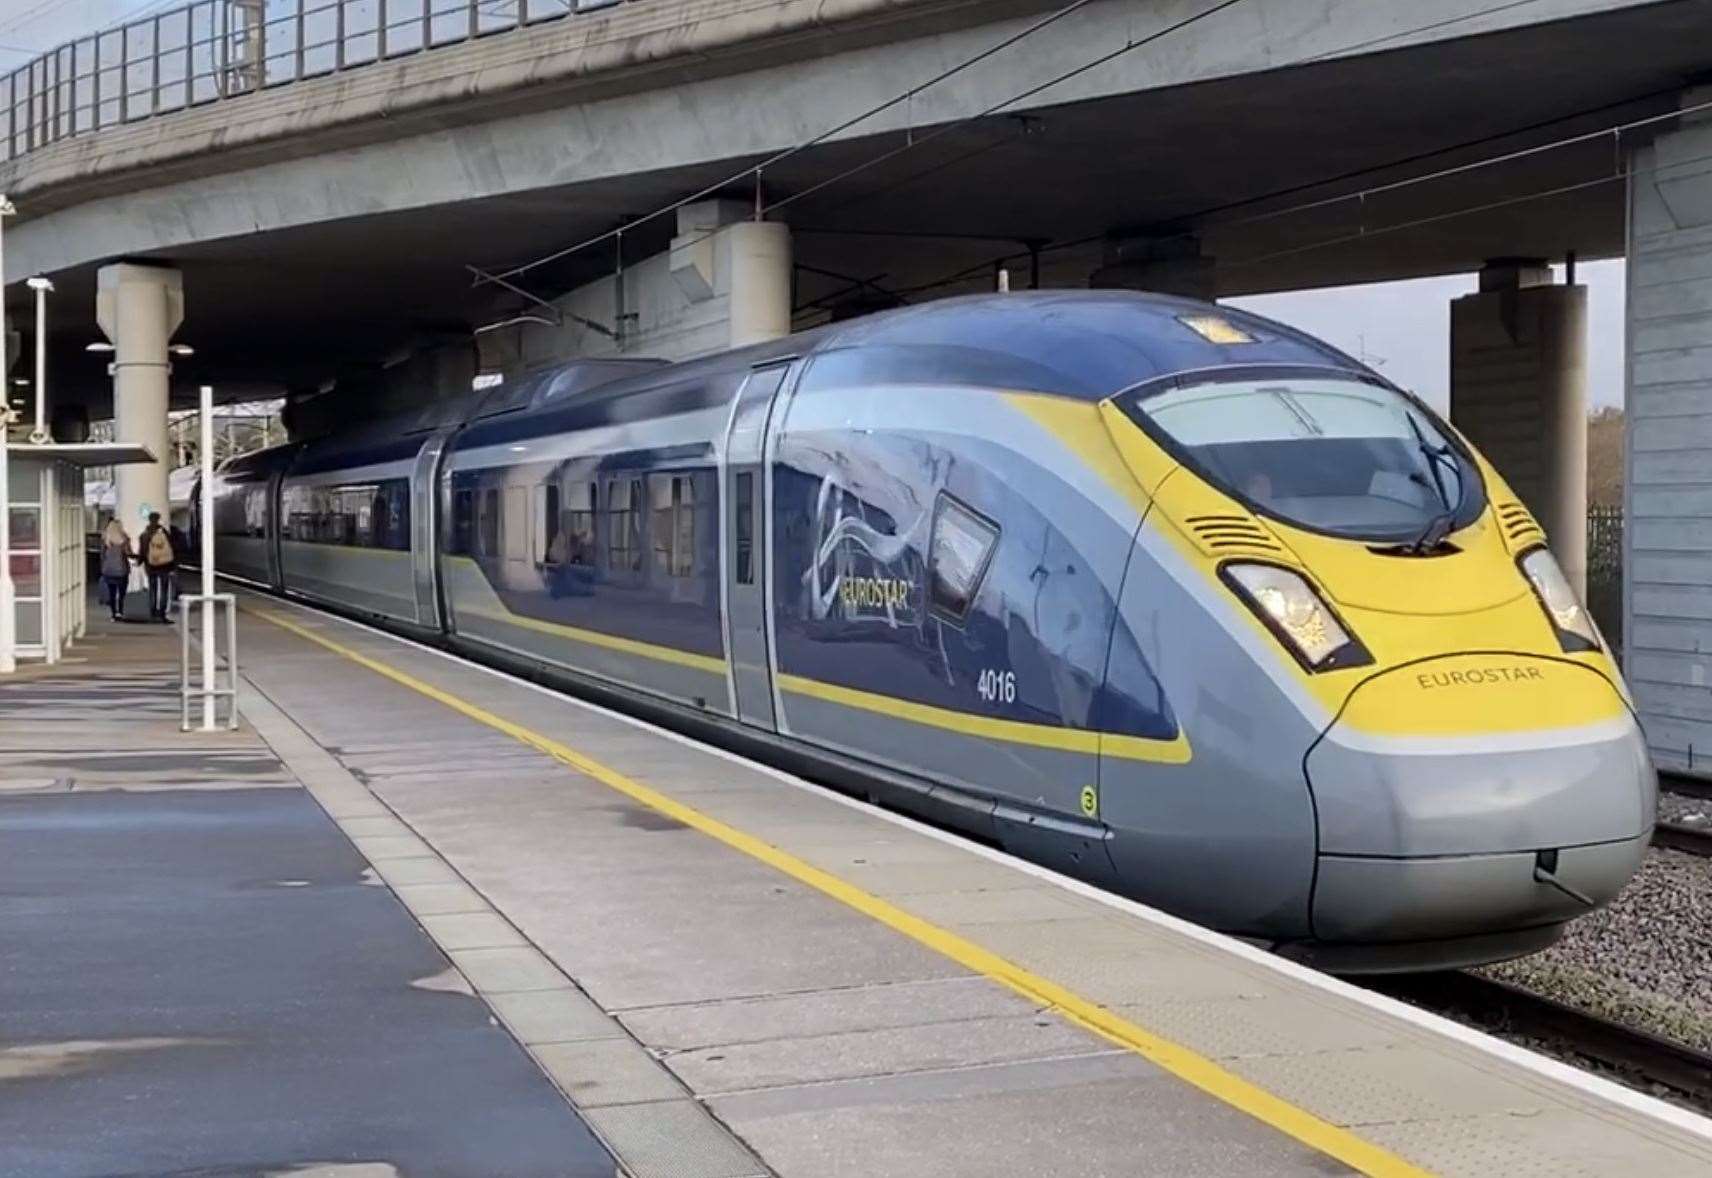 Eurostar has said it will not stop in Kent for "two to three years". Picture: Steve Salter